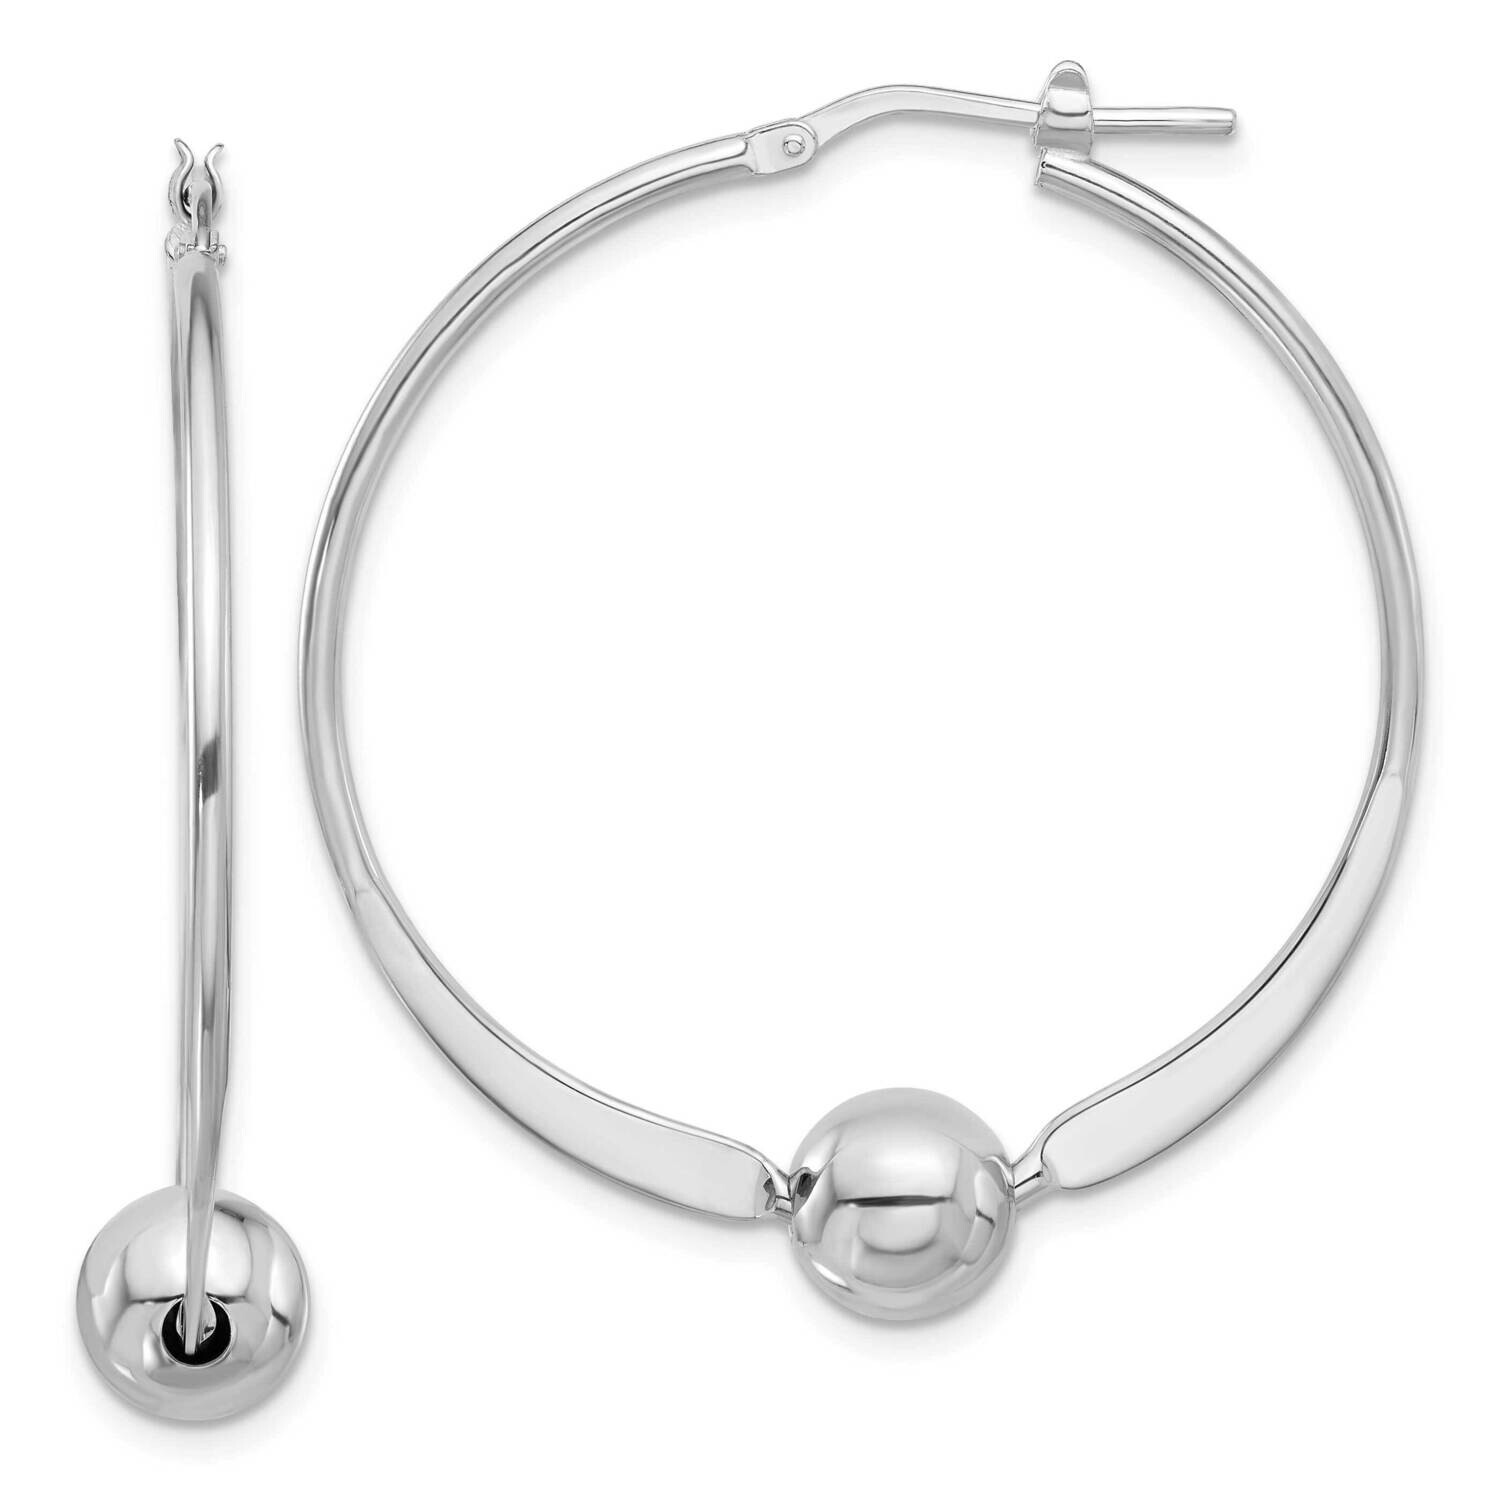 Rhod-Plated Polished Ball Large Round Hoop Earrings Sterling Silver QE16890